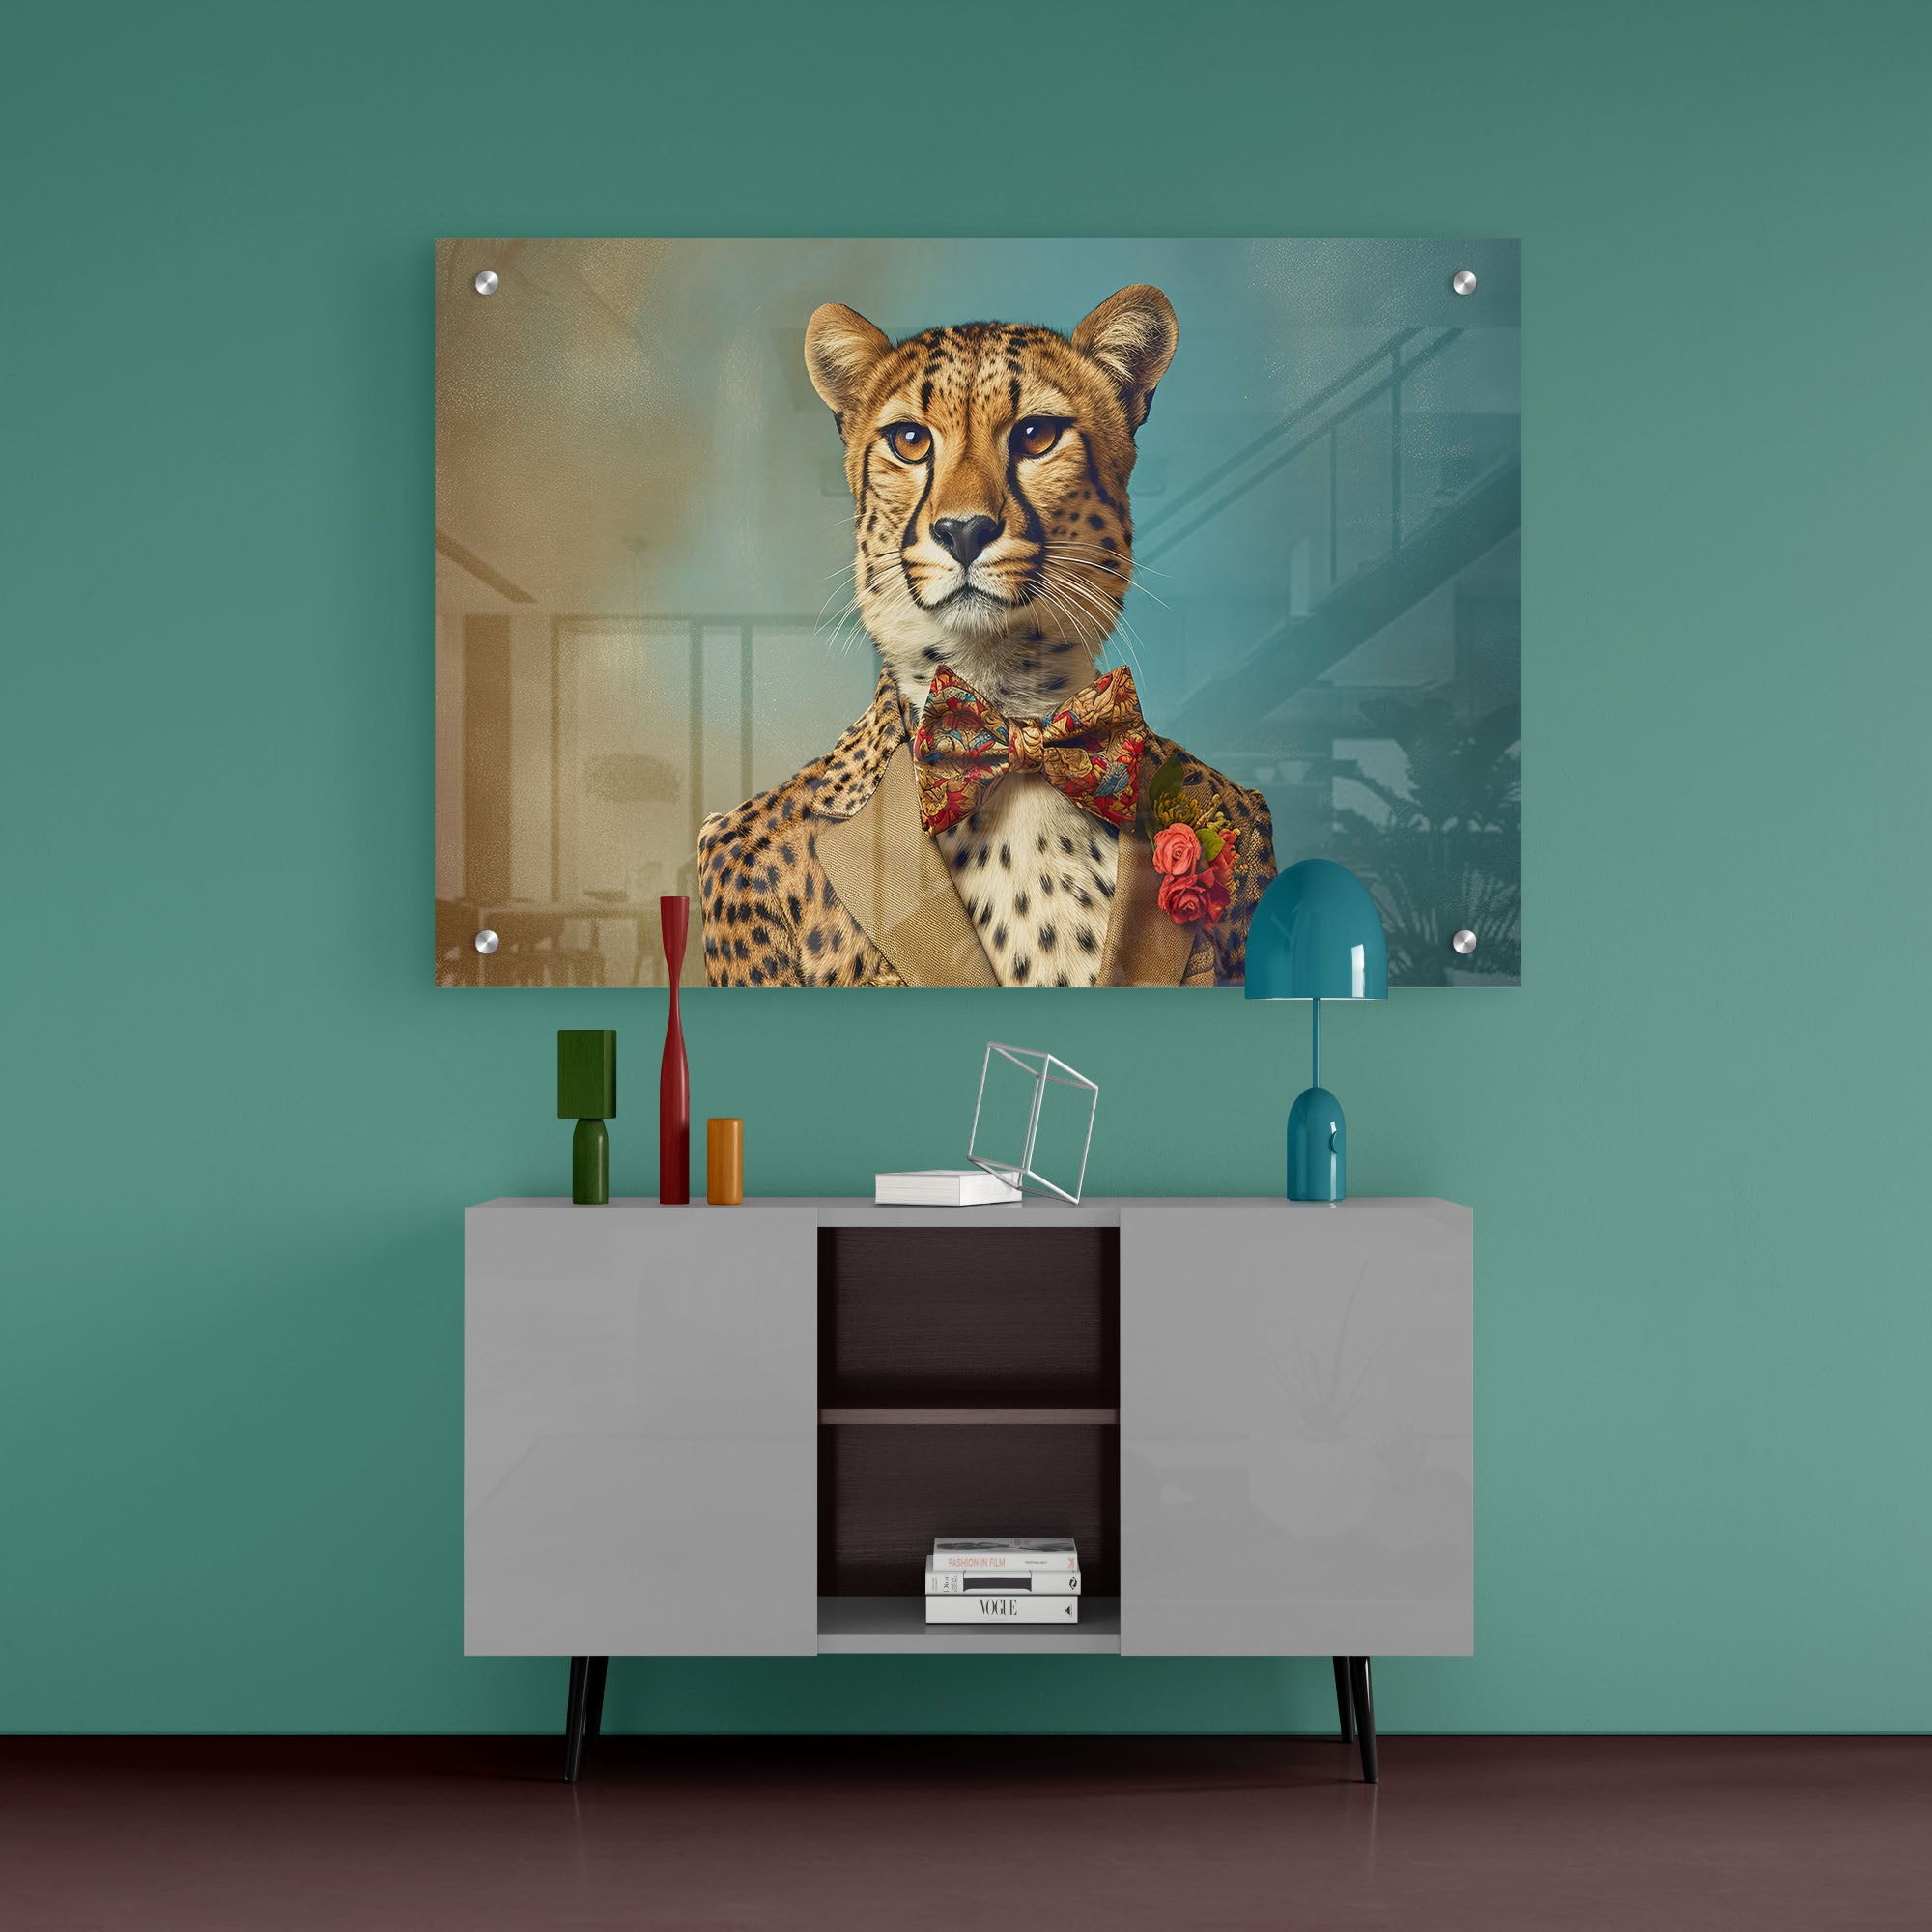 Cheetah In Suit Acrylic Wall Painting